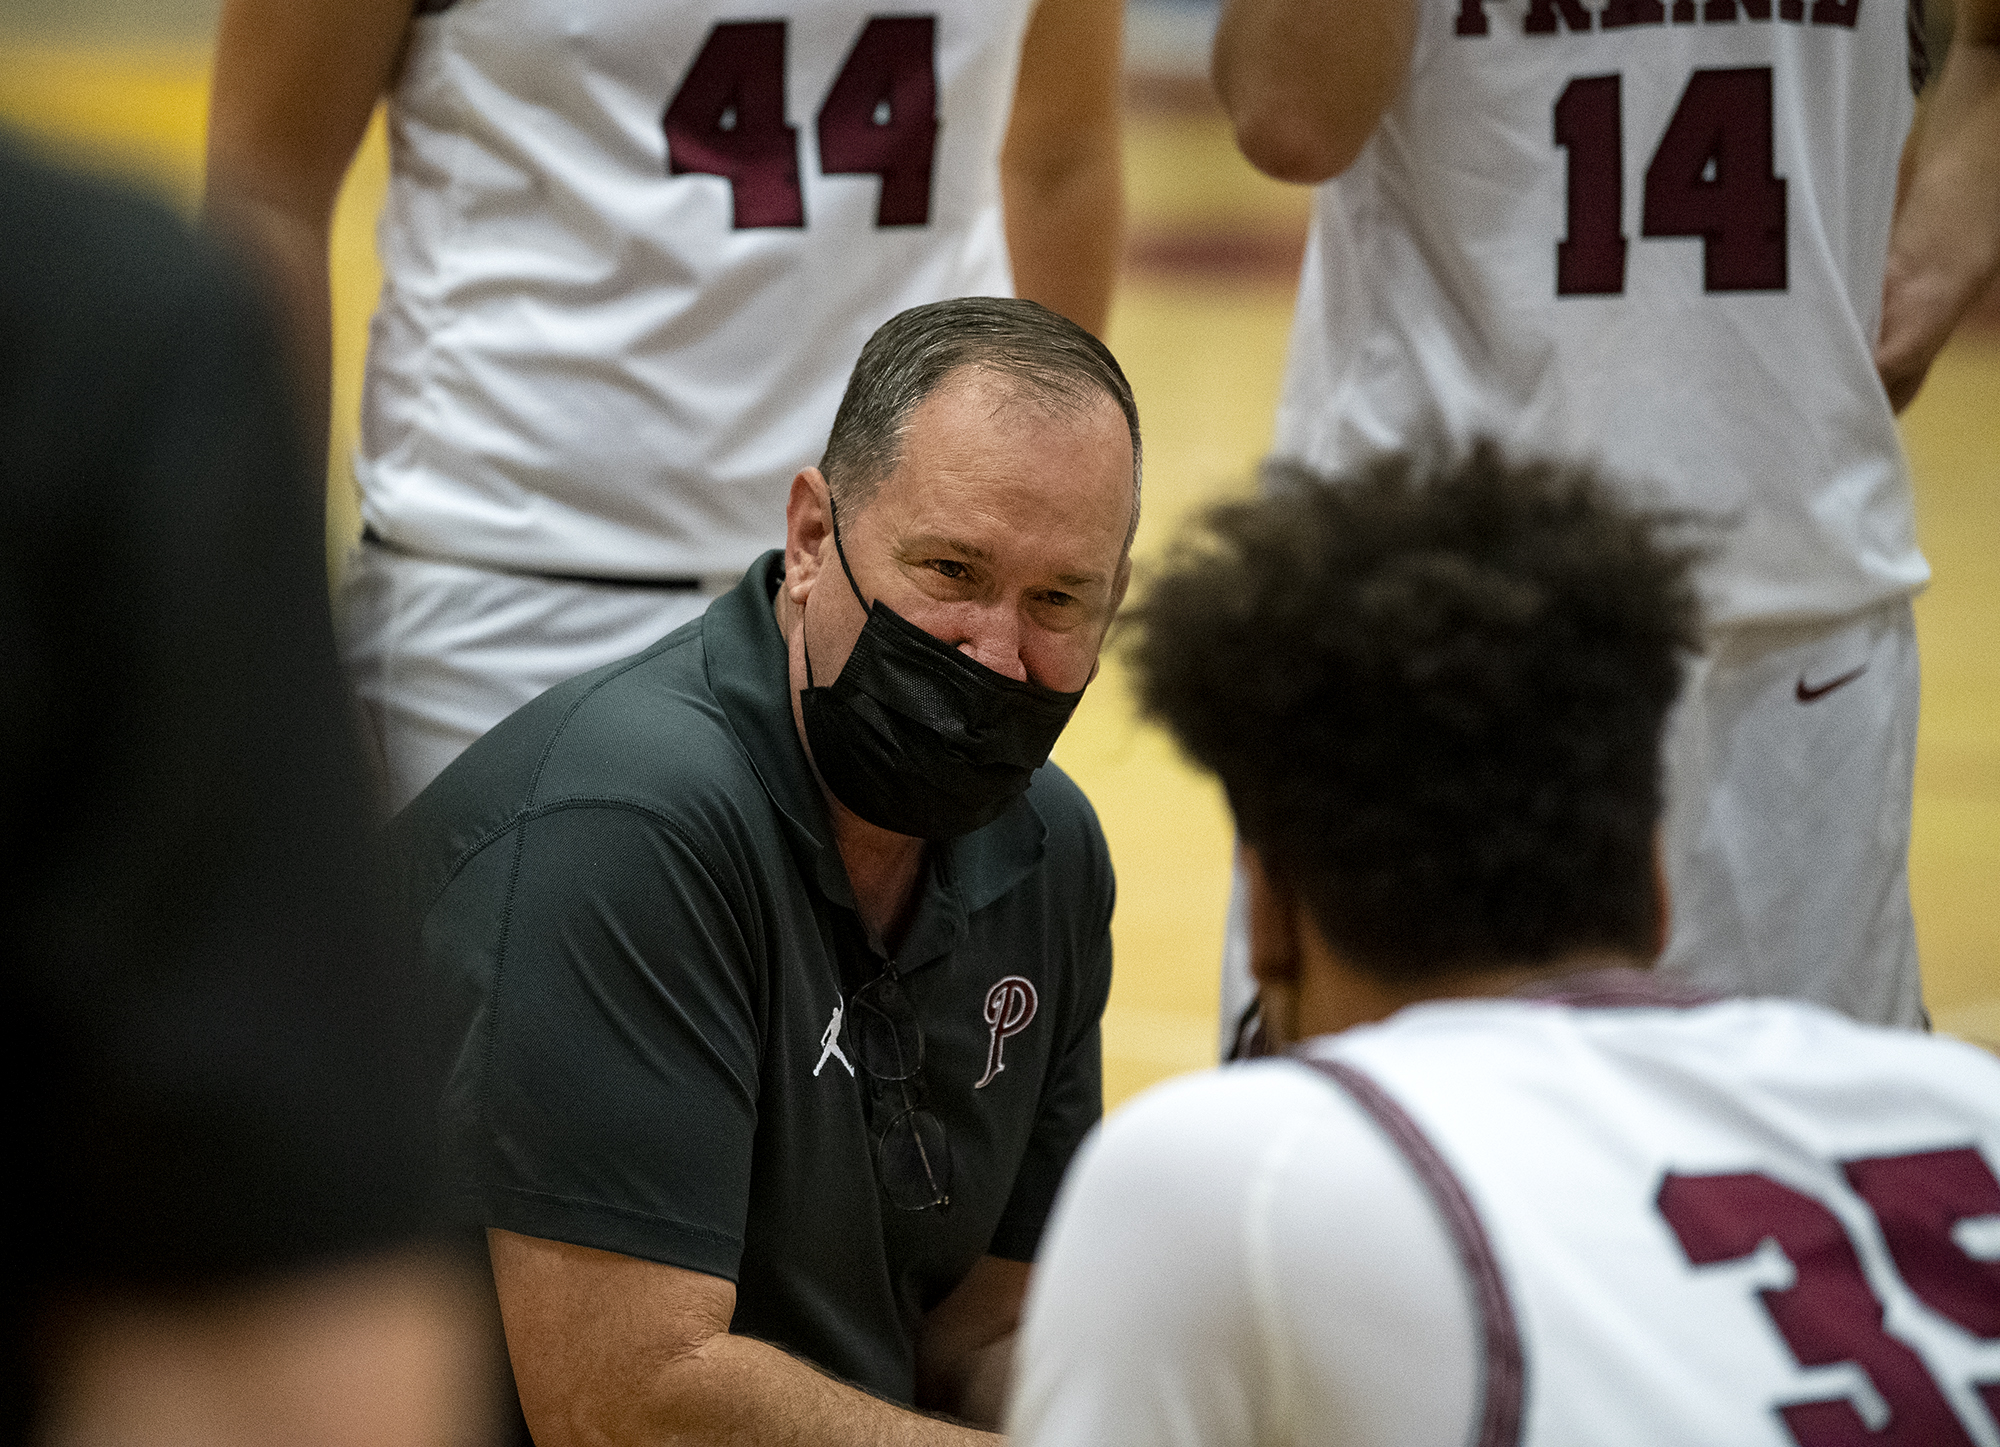 Prairie coach Kyle Brooks talks to his team during a timeout in a 4A/3A Greater St. Helens League boys basketball game on Tuesday, April 20, 2021 at Prairie High School. Tuesday marked Brooks’ return to coaching after missing last season as he battled Guillain-Barré syndrome.